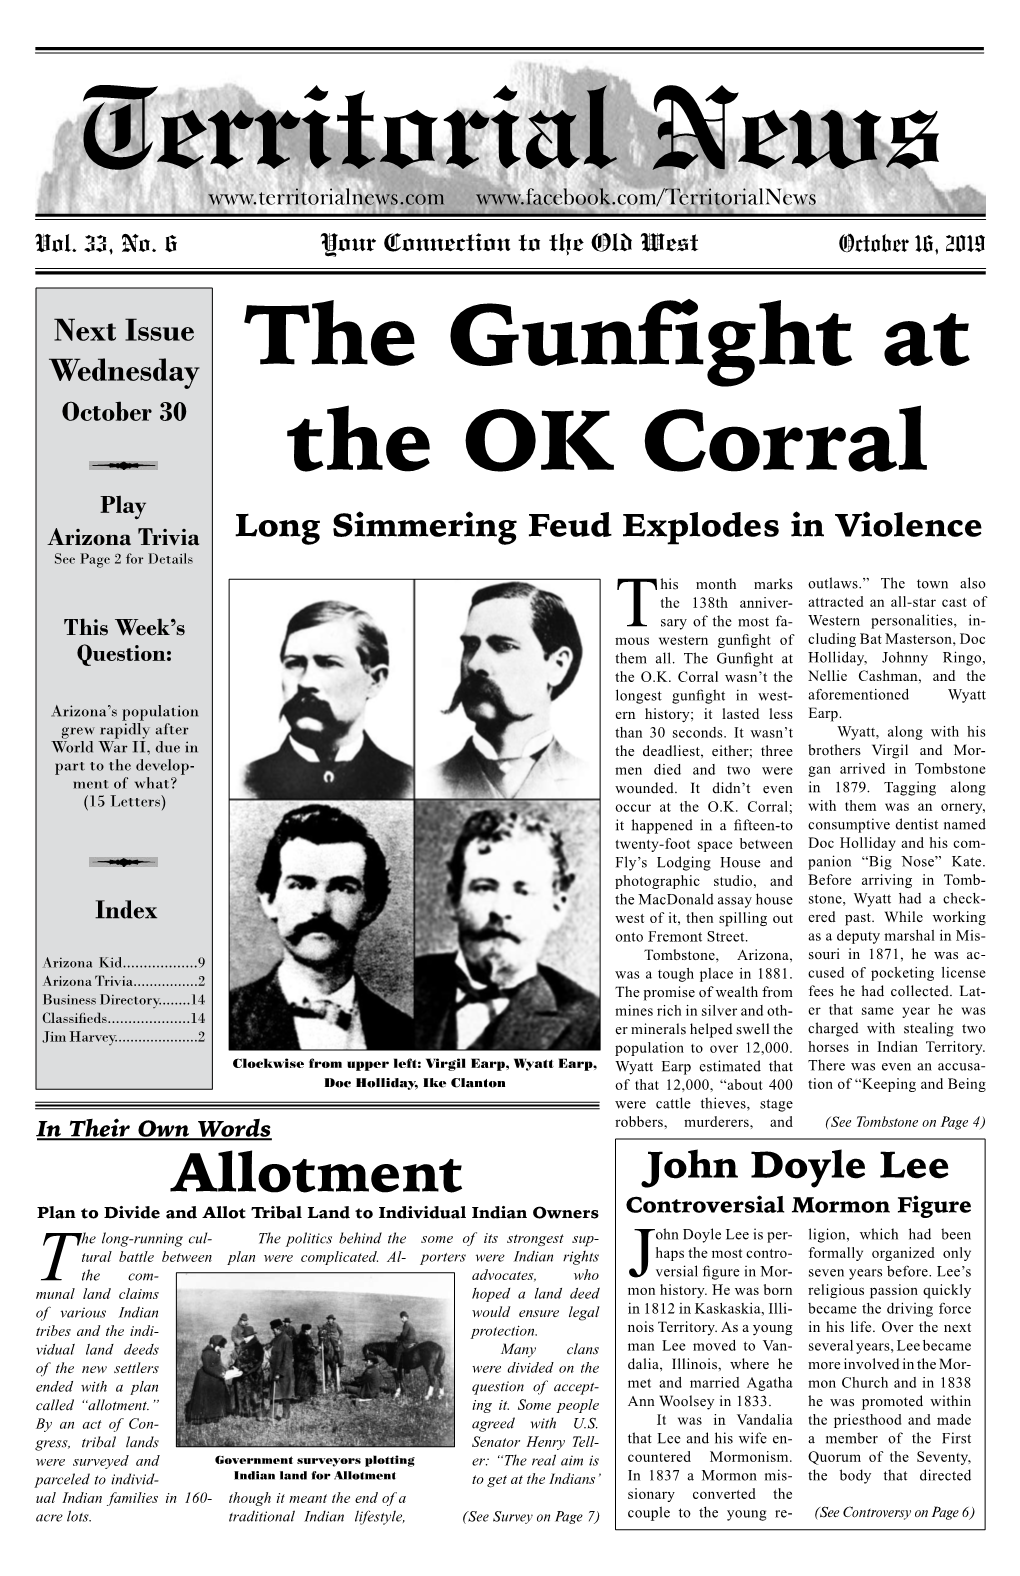 The Gunfight at the OK Corral